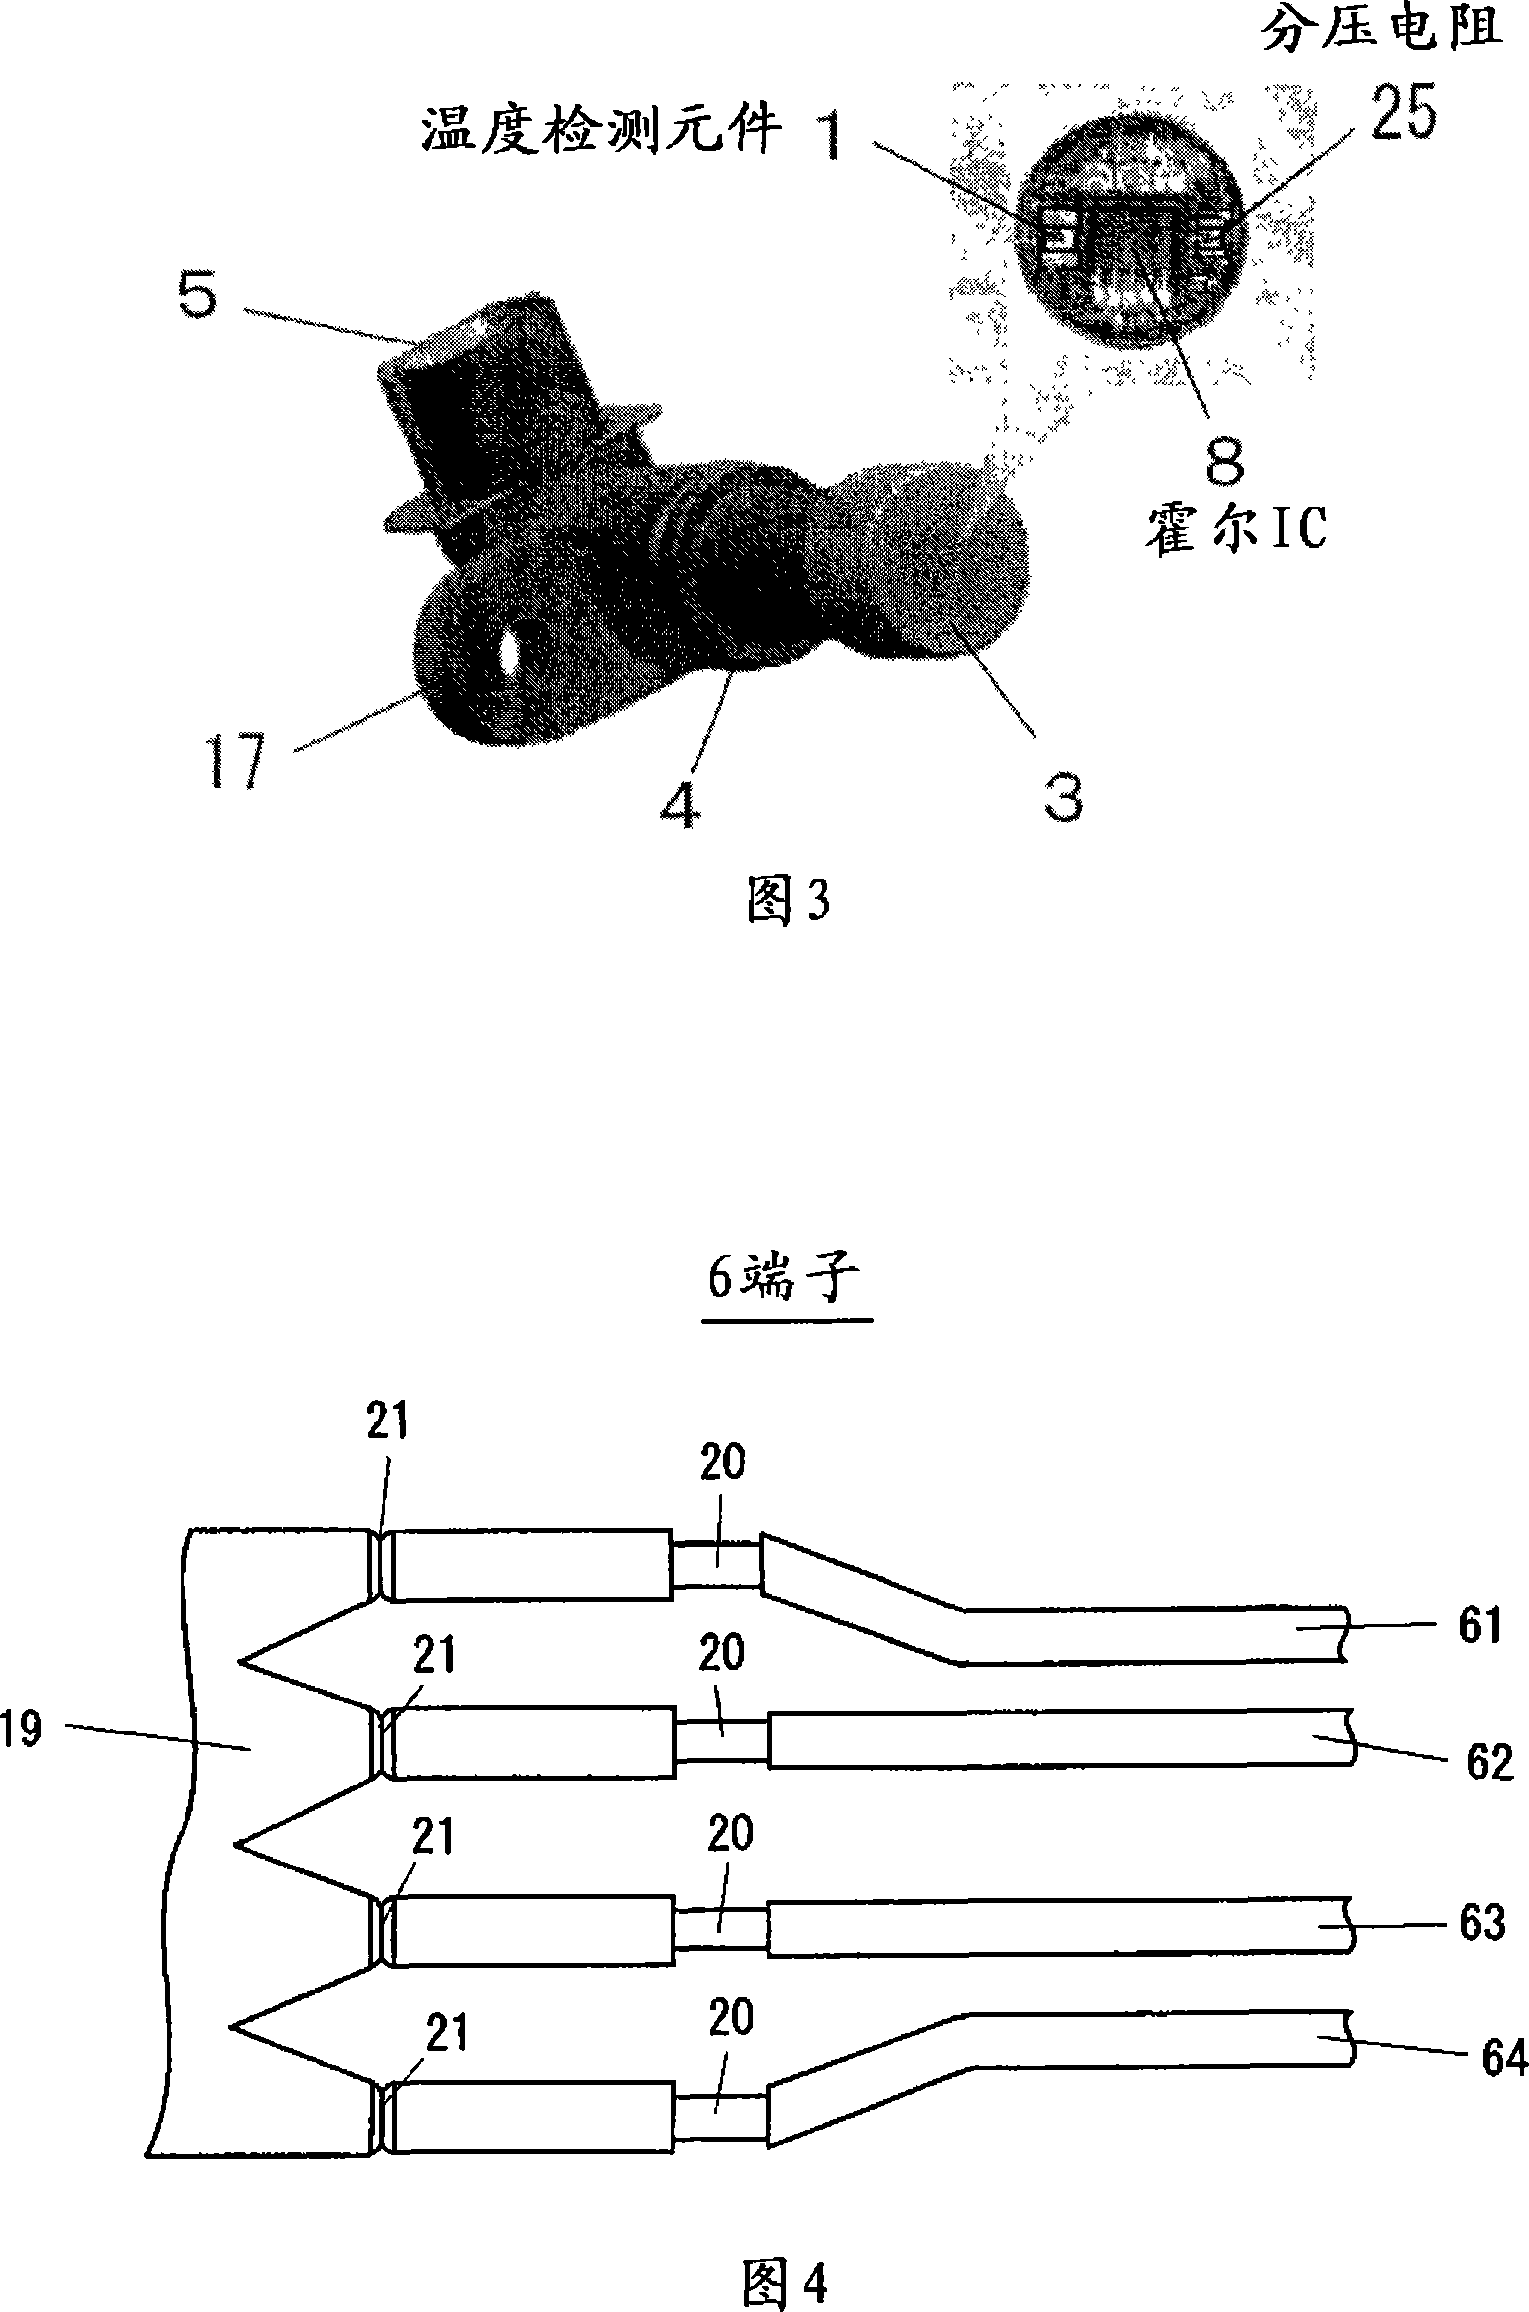 Multifunctional detecting device for engine